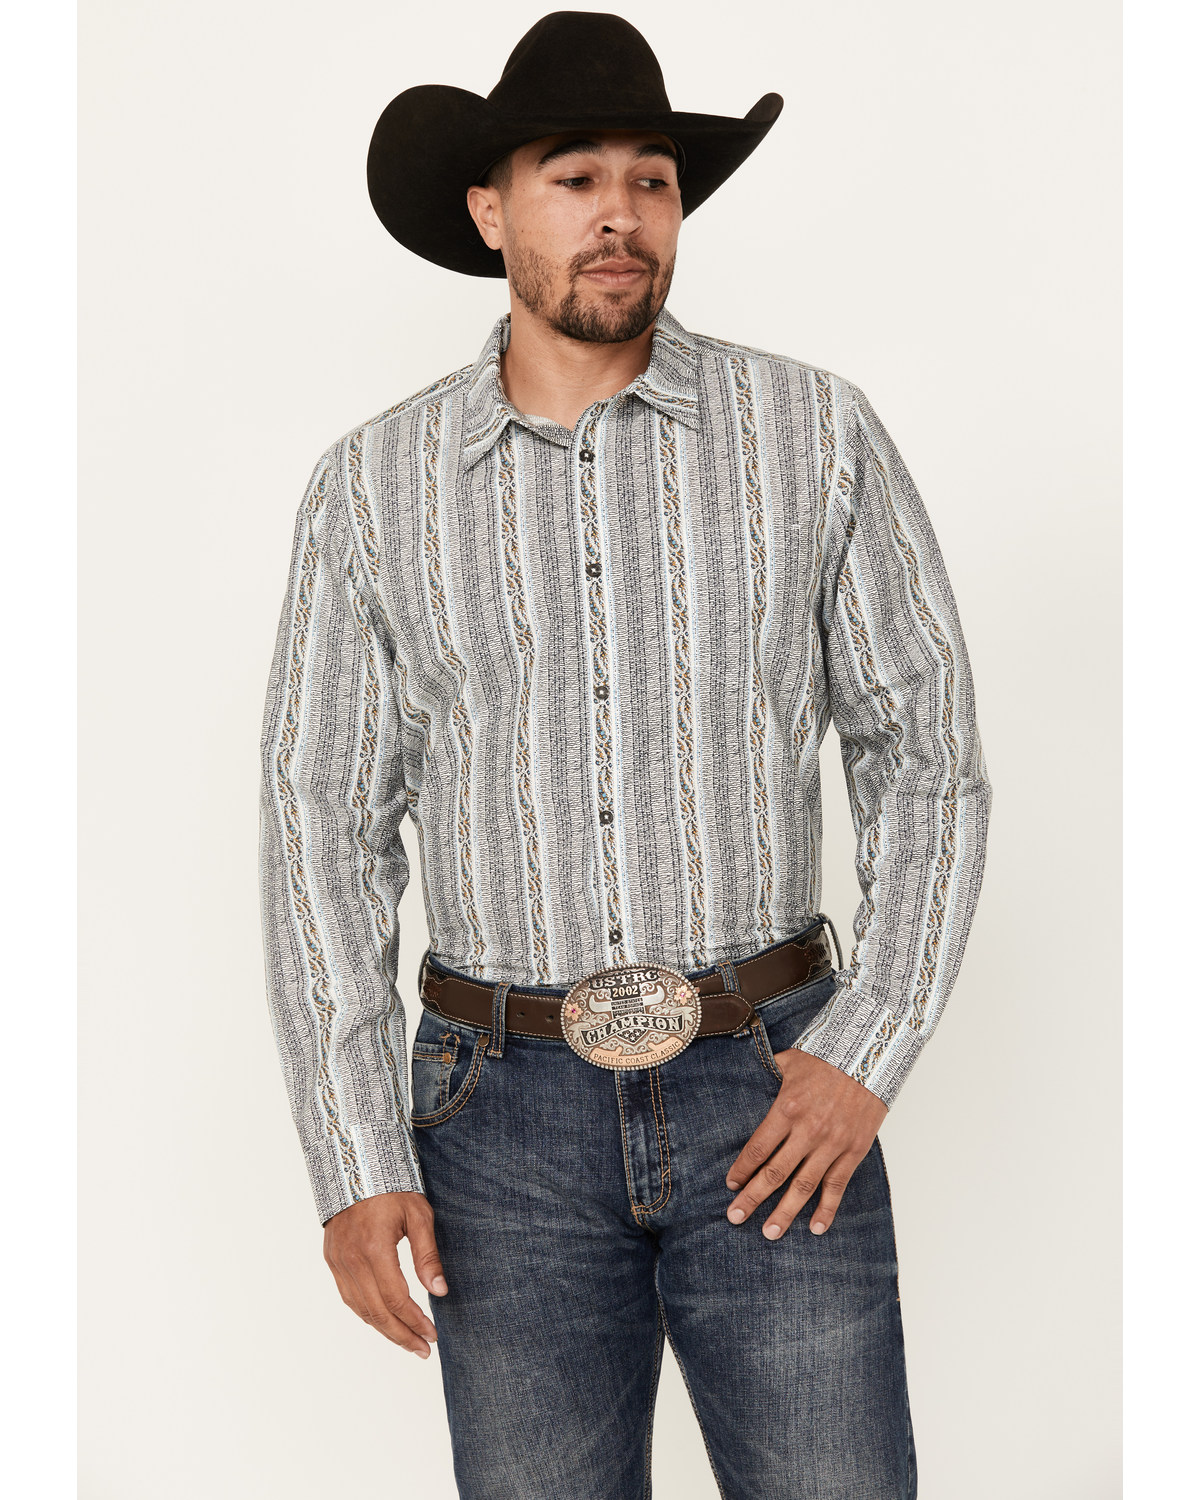 Gibson Trading Co Men's Rough Road Striped Print Long Sleeve Button-Down Western Shirt